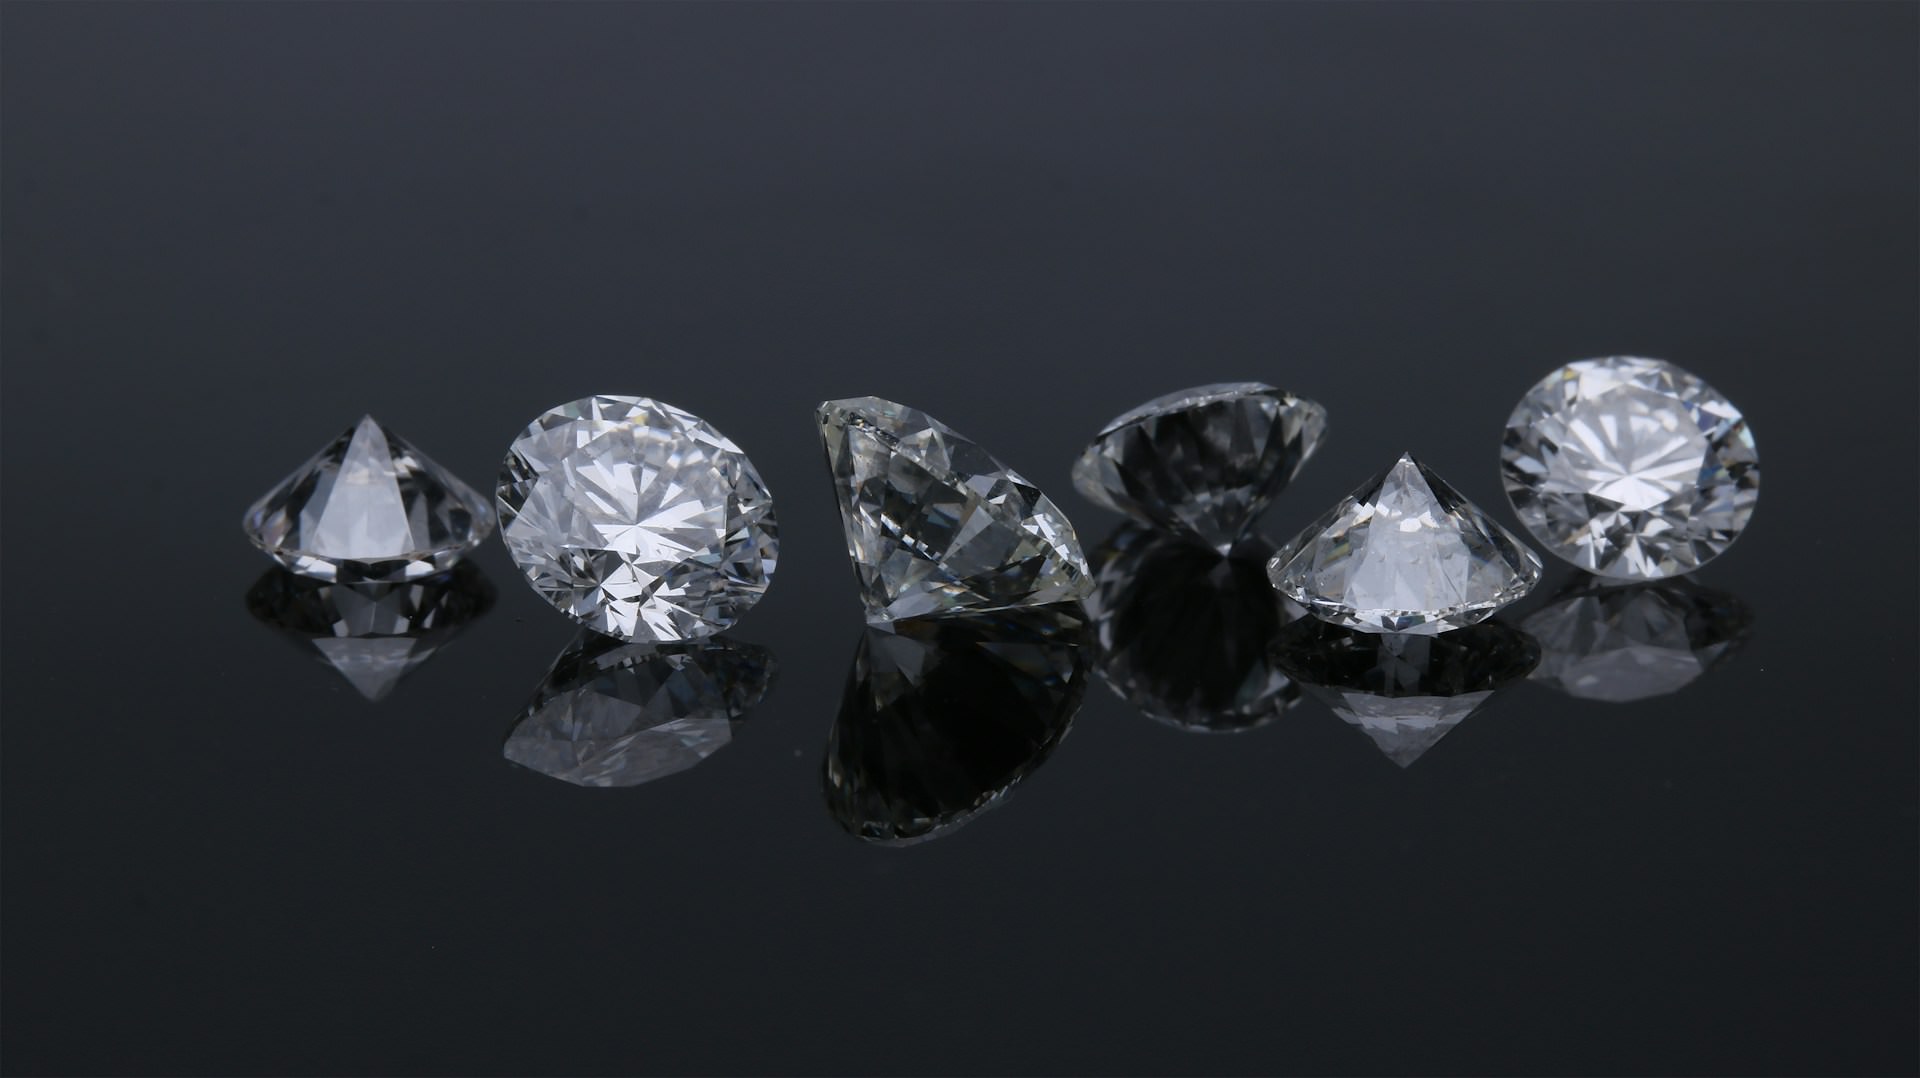 Despite their reputation for being indestructible, diamonds can actually burn. Exposing them to temperatures around 1,600°F (871°C) in the presence of oxygen will cause them to catch fire and eventually be destroyed.